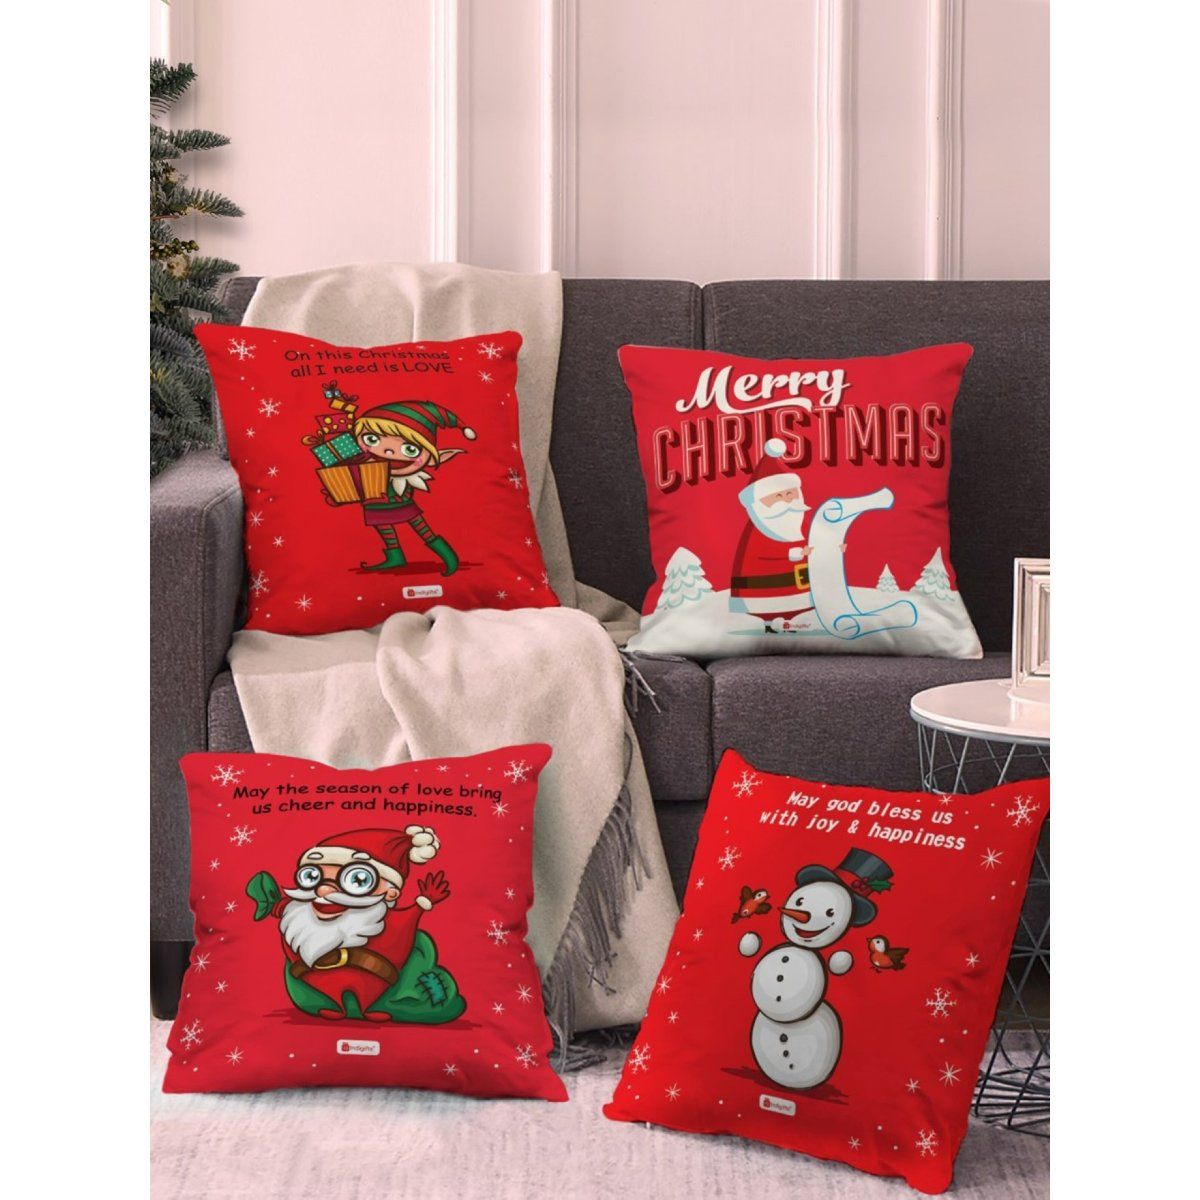 Indigifts Holiday Fun with Cute Christmas Characters Poly Satin ...